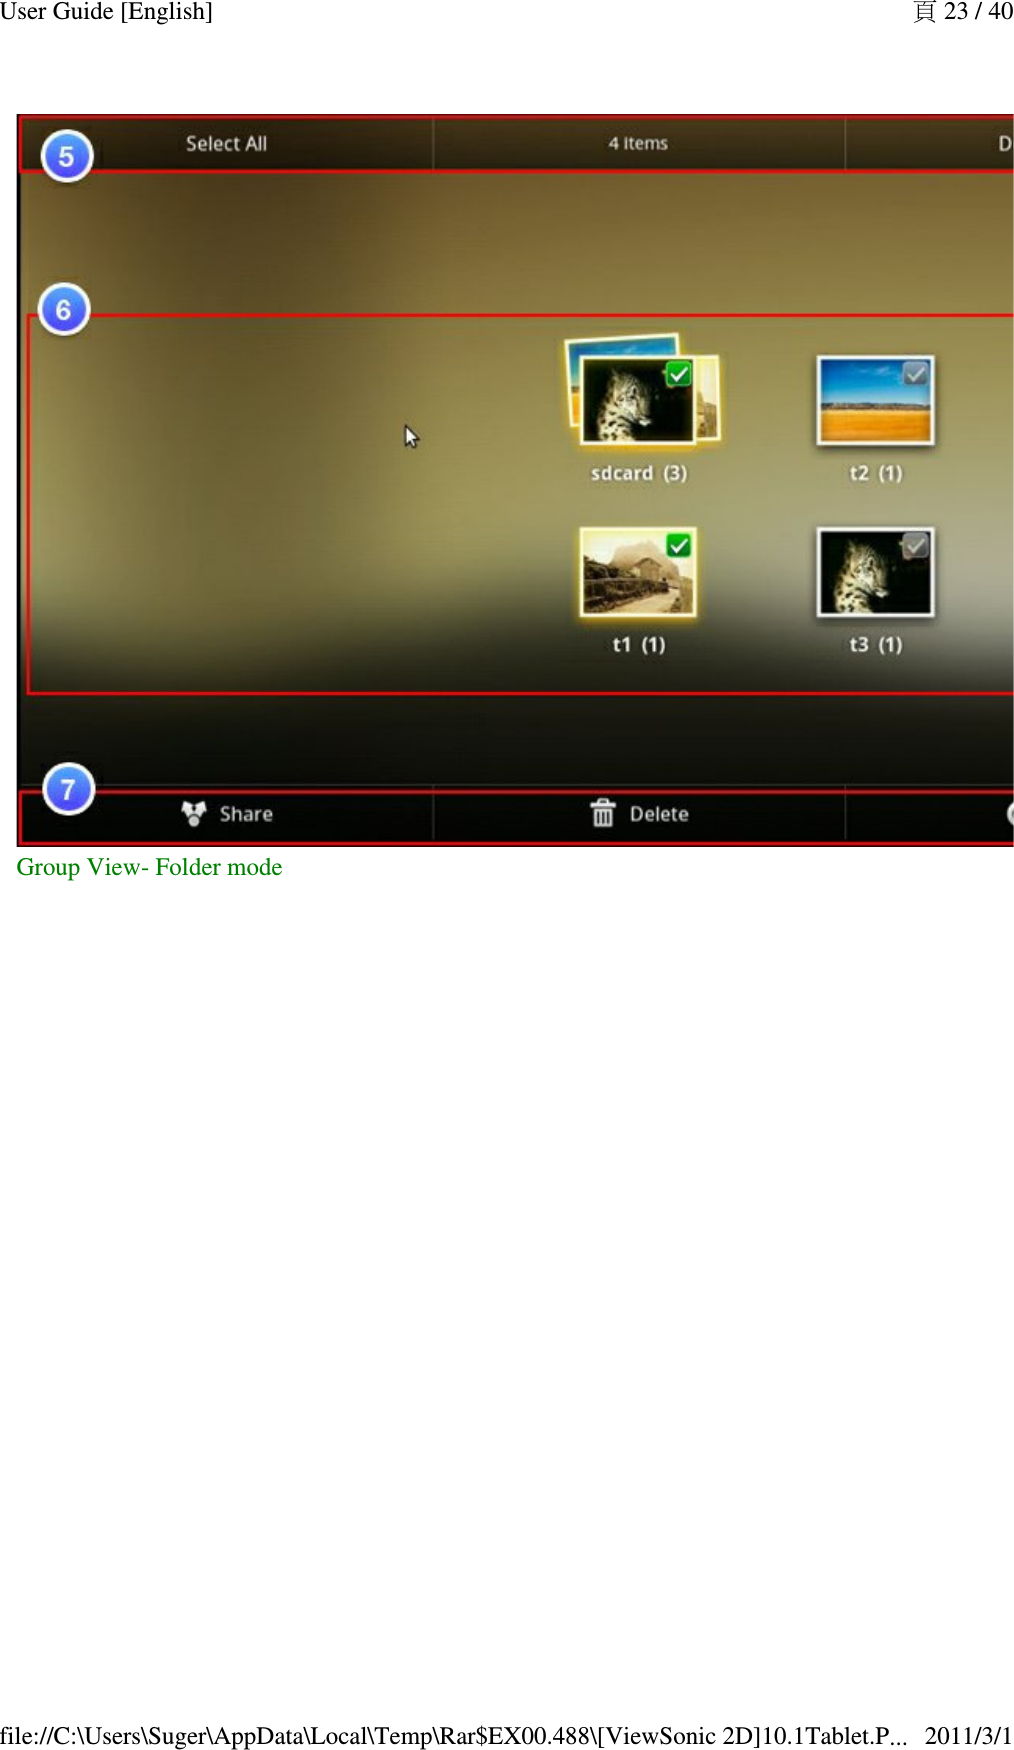 Group View- Folder mode 頁 23 / 40User Guide [English]2011/3/1file://C:\Users\Suger\AppData\Local\Temp\Rar$EX00.488\[ViewSonic 2D]10.1Tablet.P...